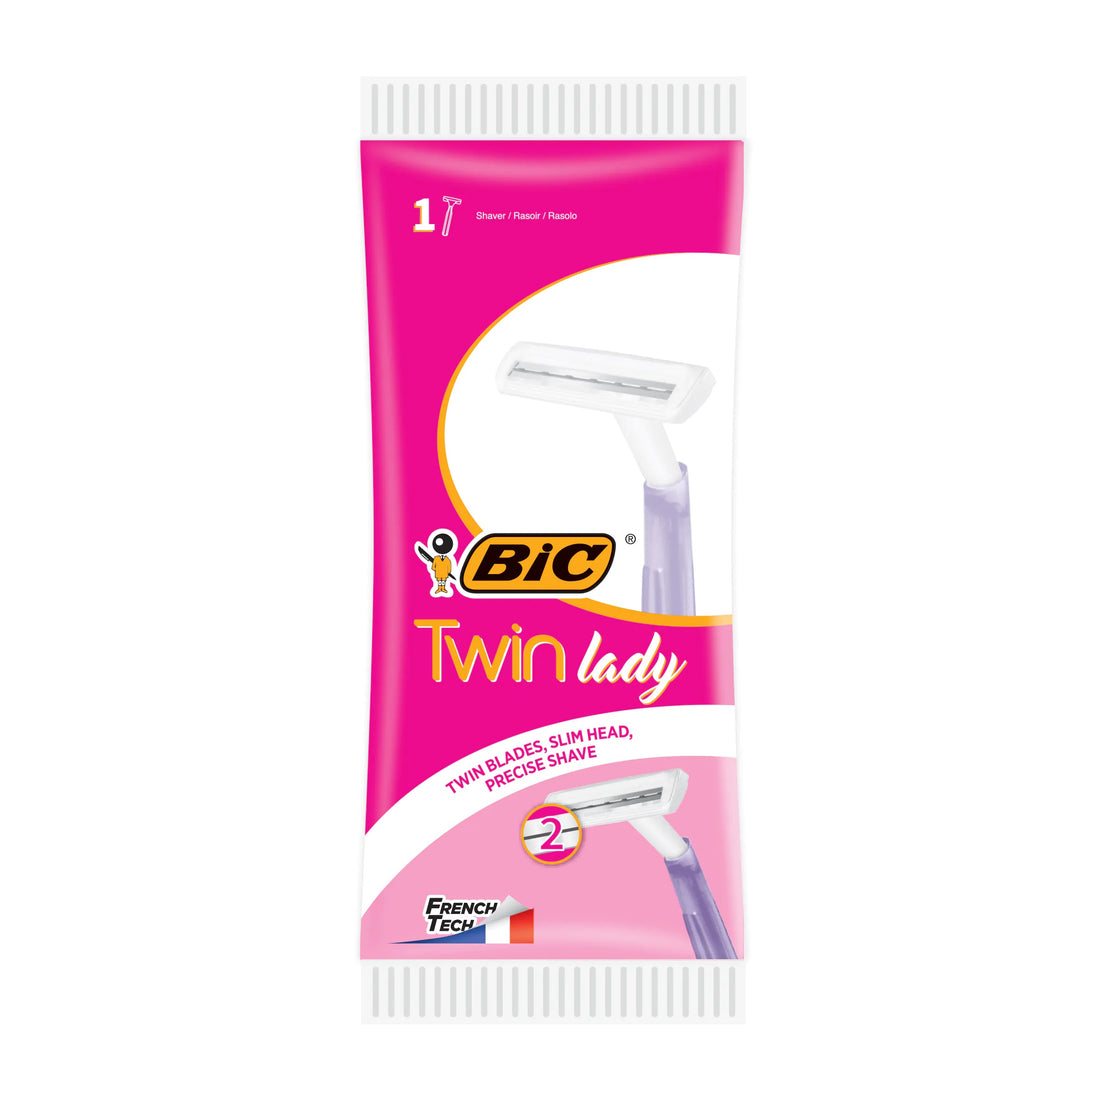 BIC Razor Twin Lady For Women (Pack of 03)